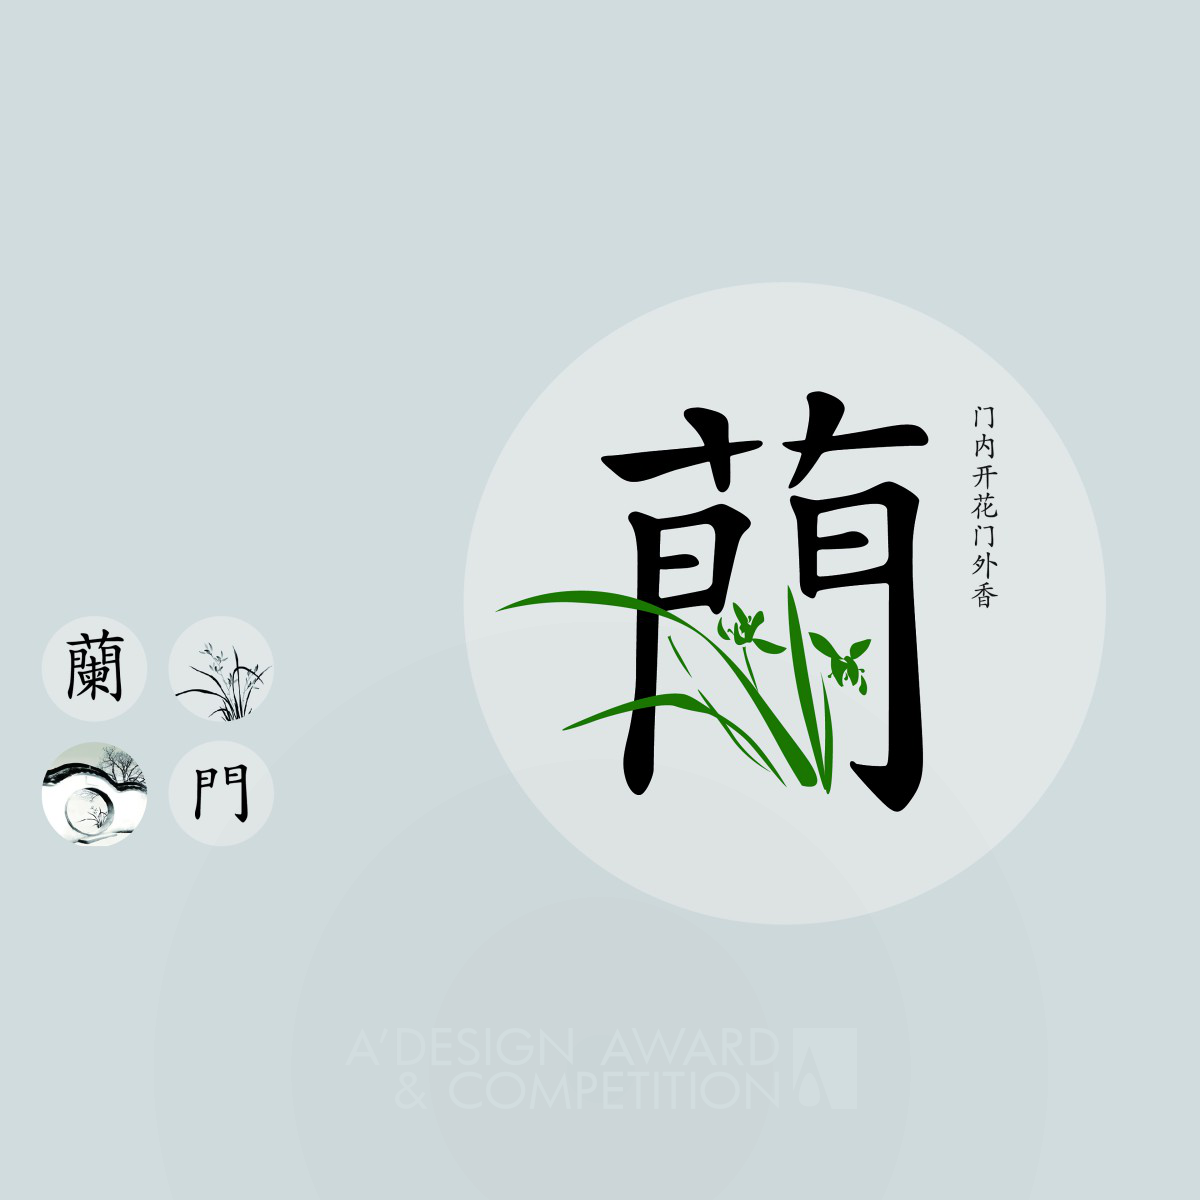 Orchid Expo Logo by Dongdao Creative Branding Group